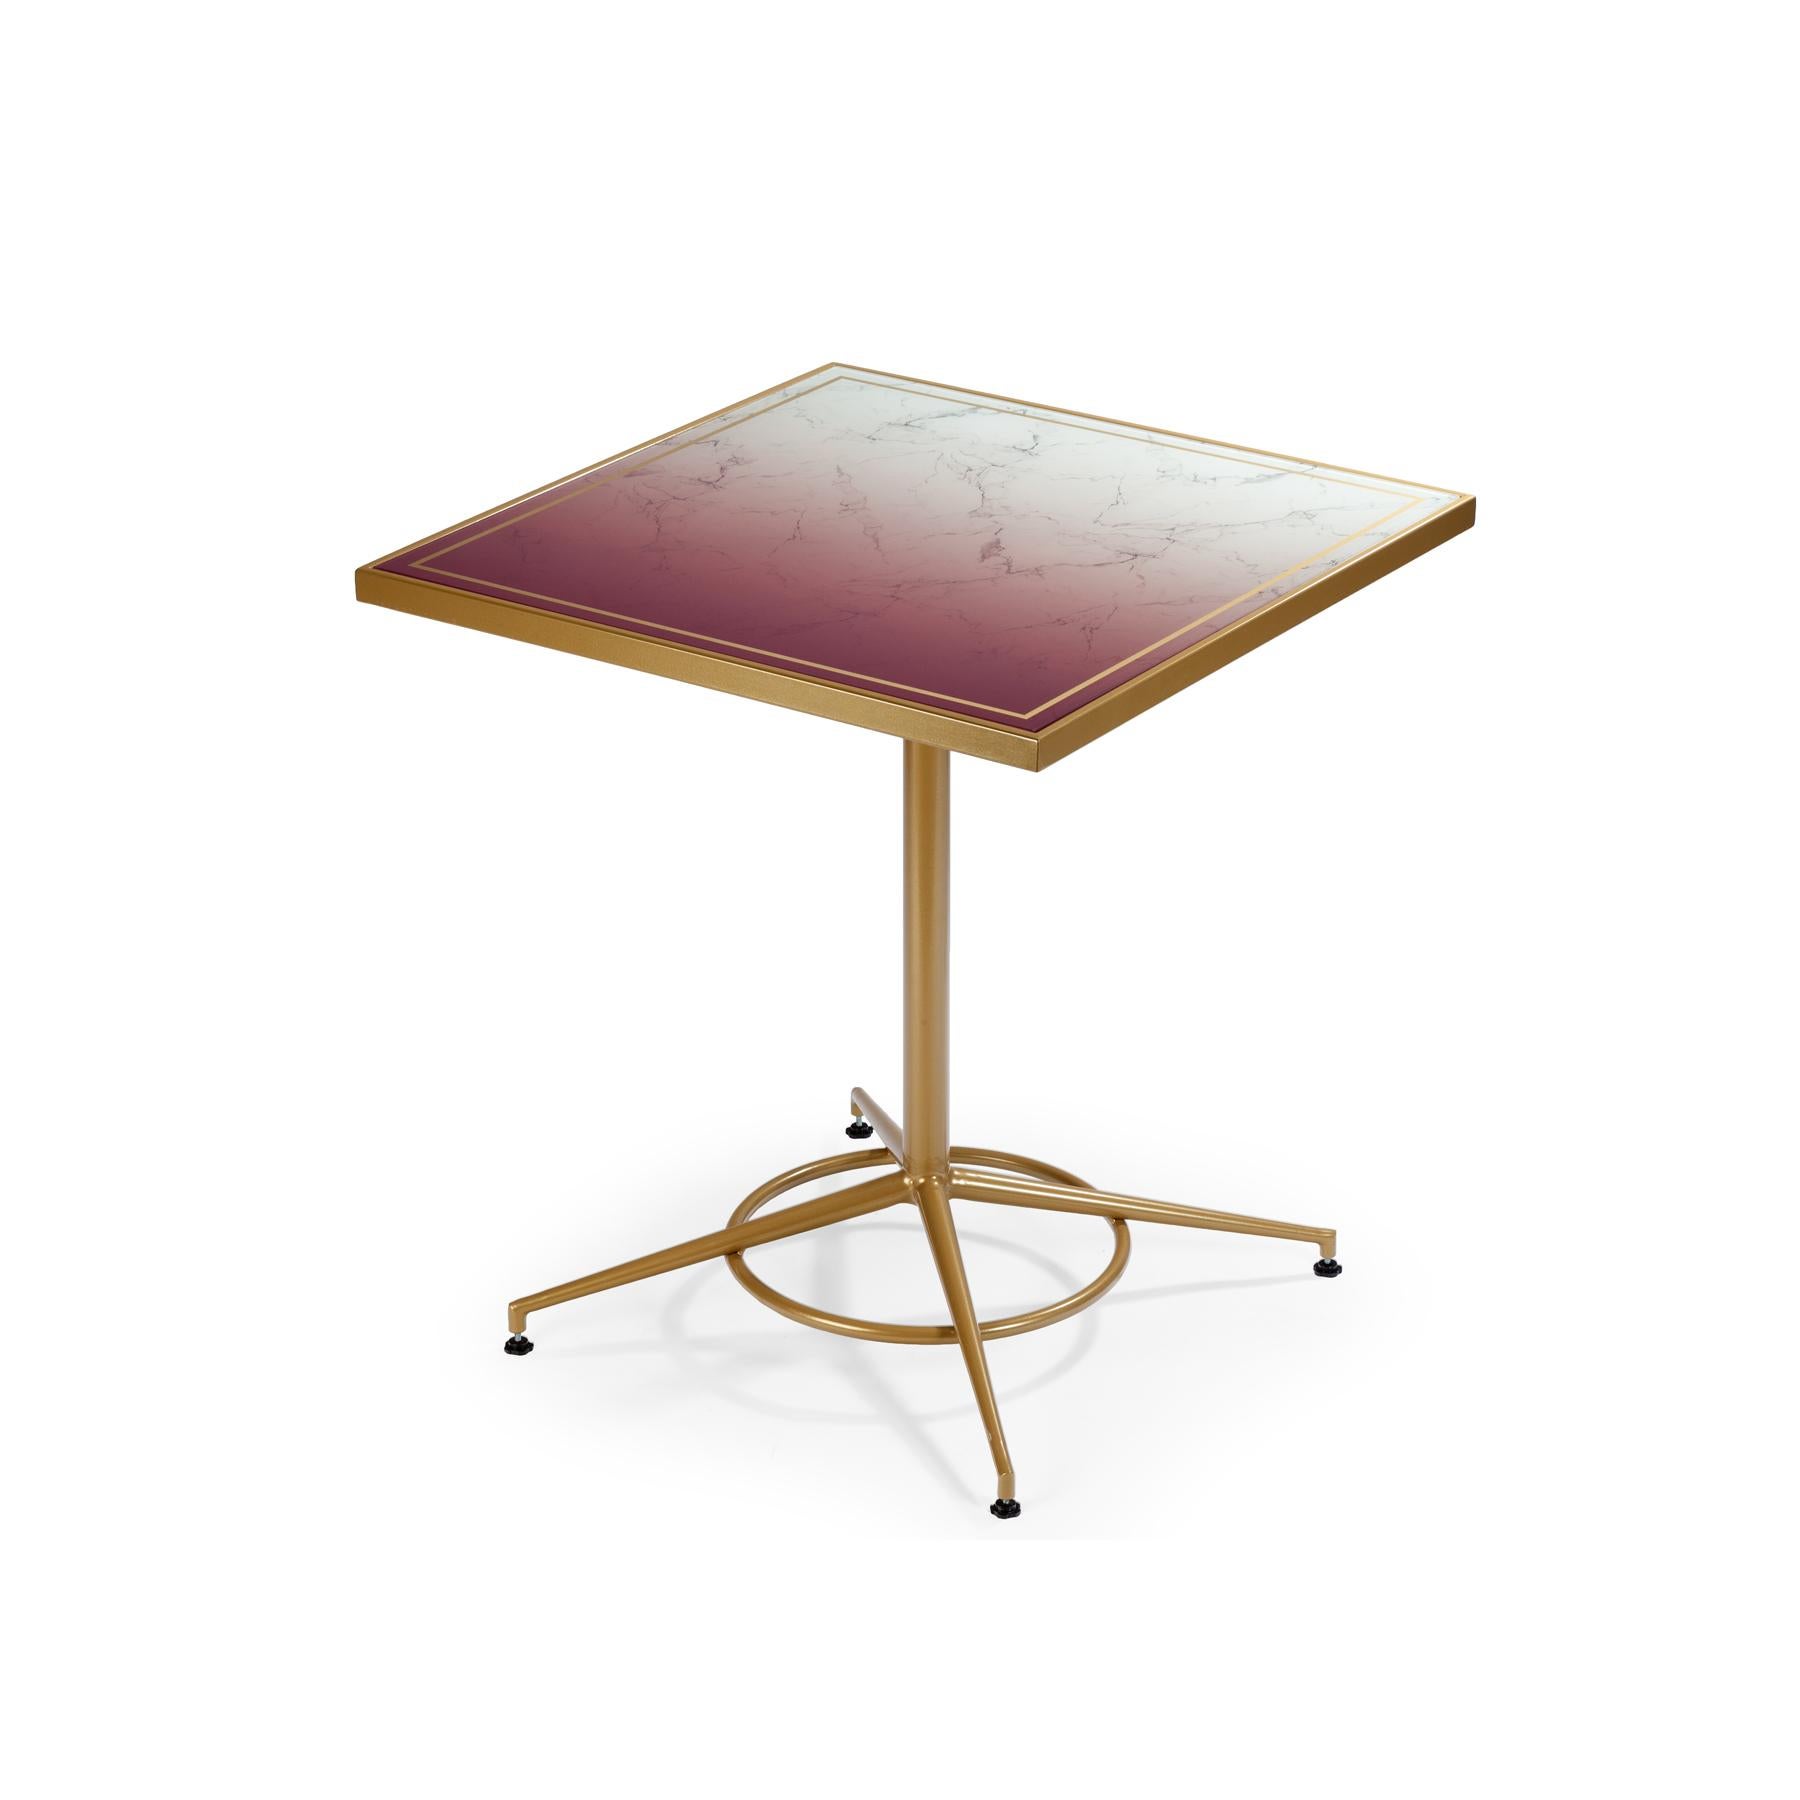 Praga dining table is a piece that combines an Art Deco/Bistrot inspired bases with digitally printed tempered glass tops, in various designs and colors. Its elegance will stand out in any space, perfect for restaurants and cafes. Made to Order.